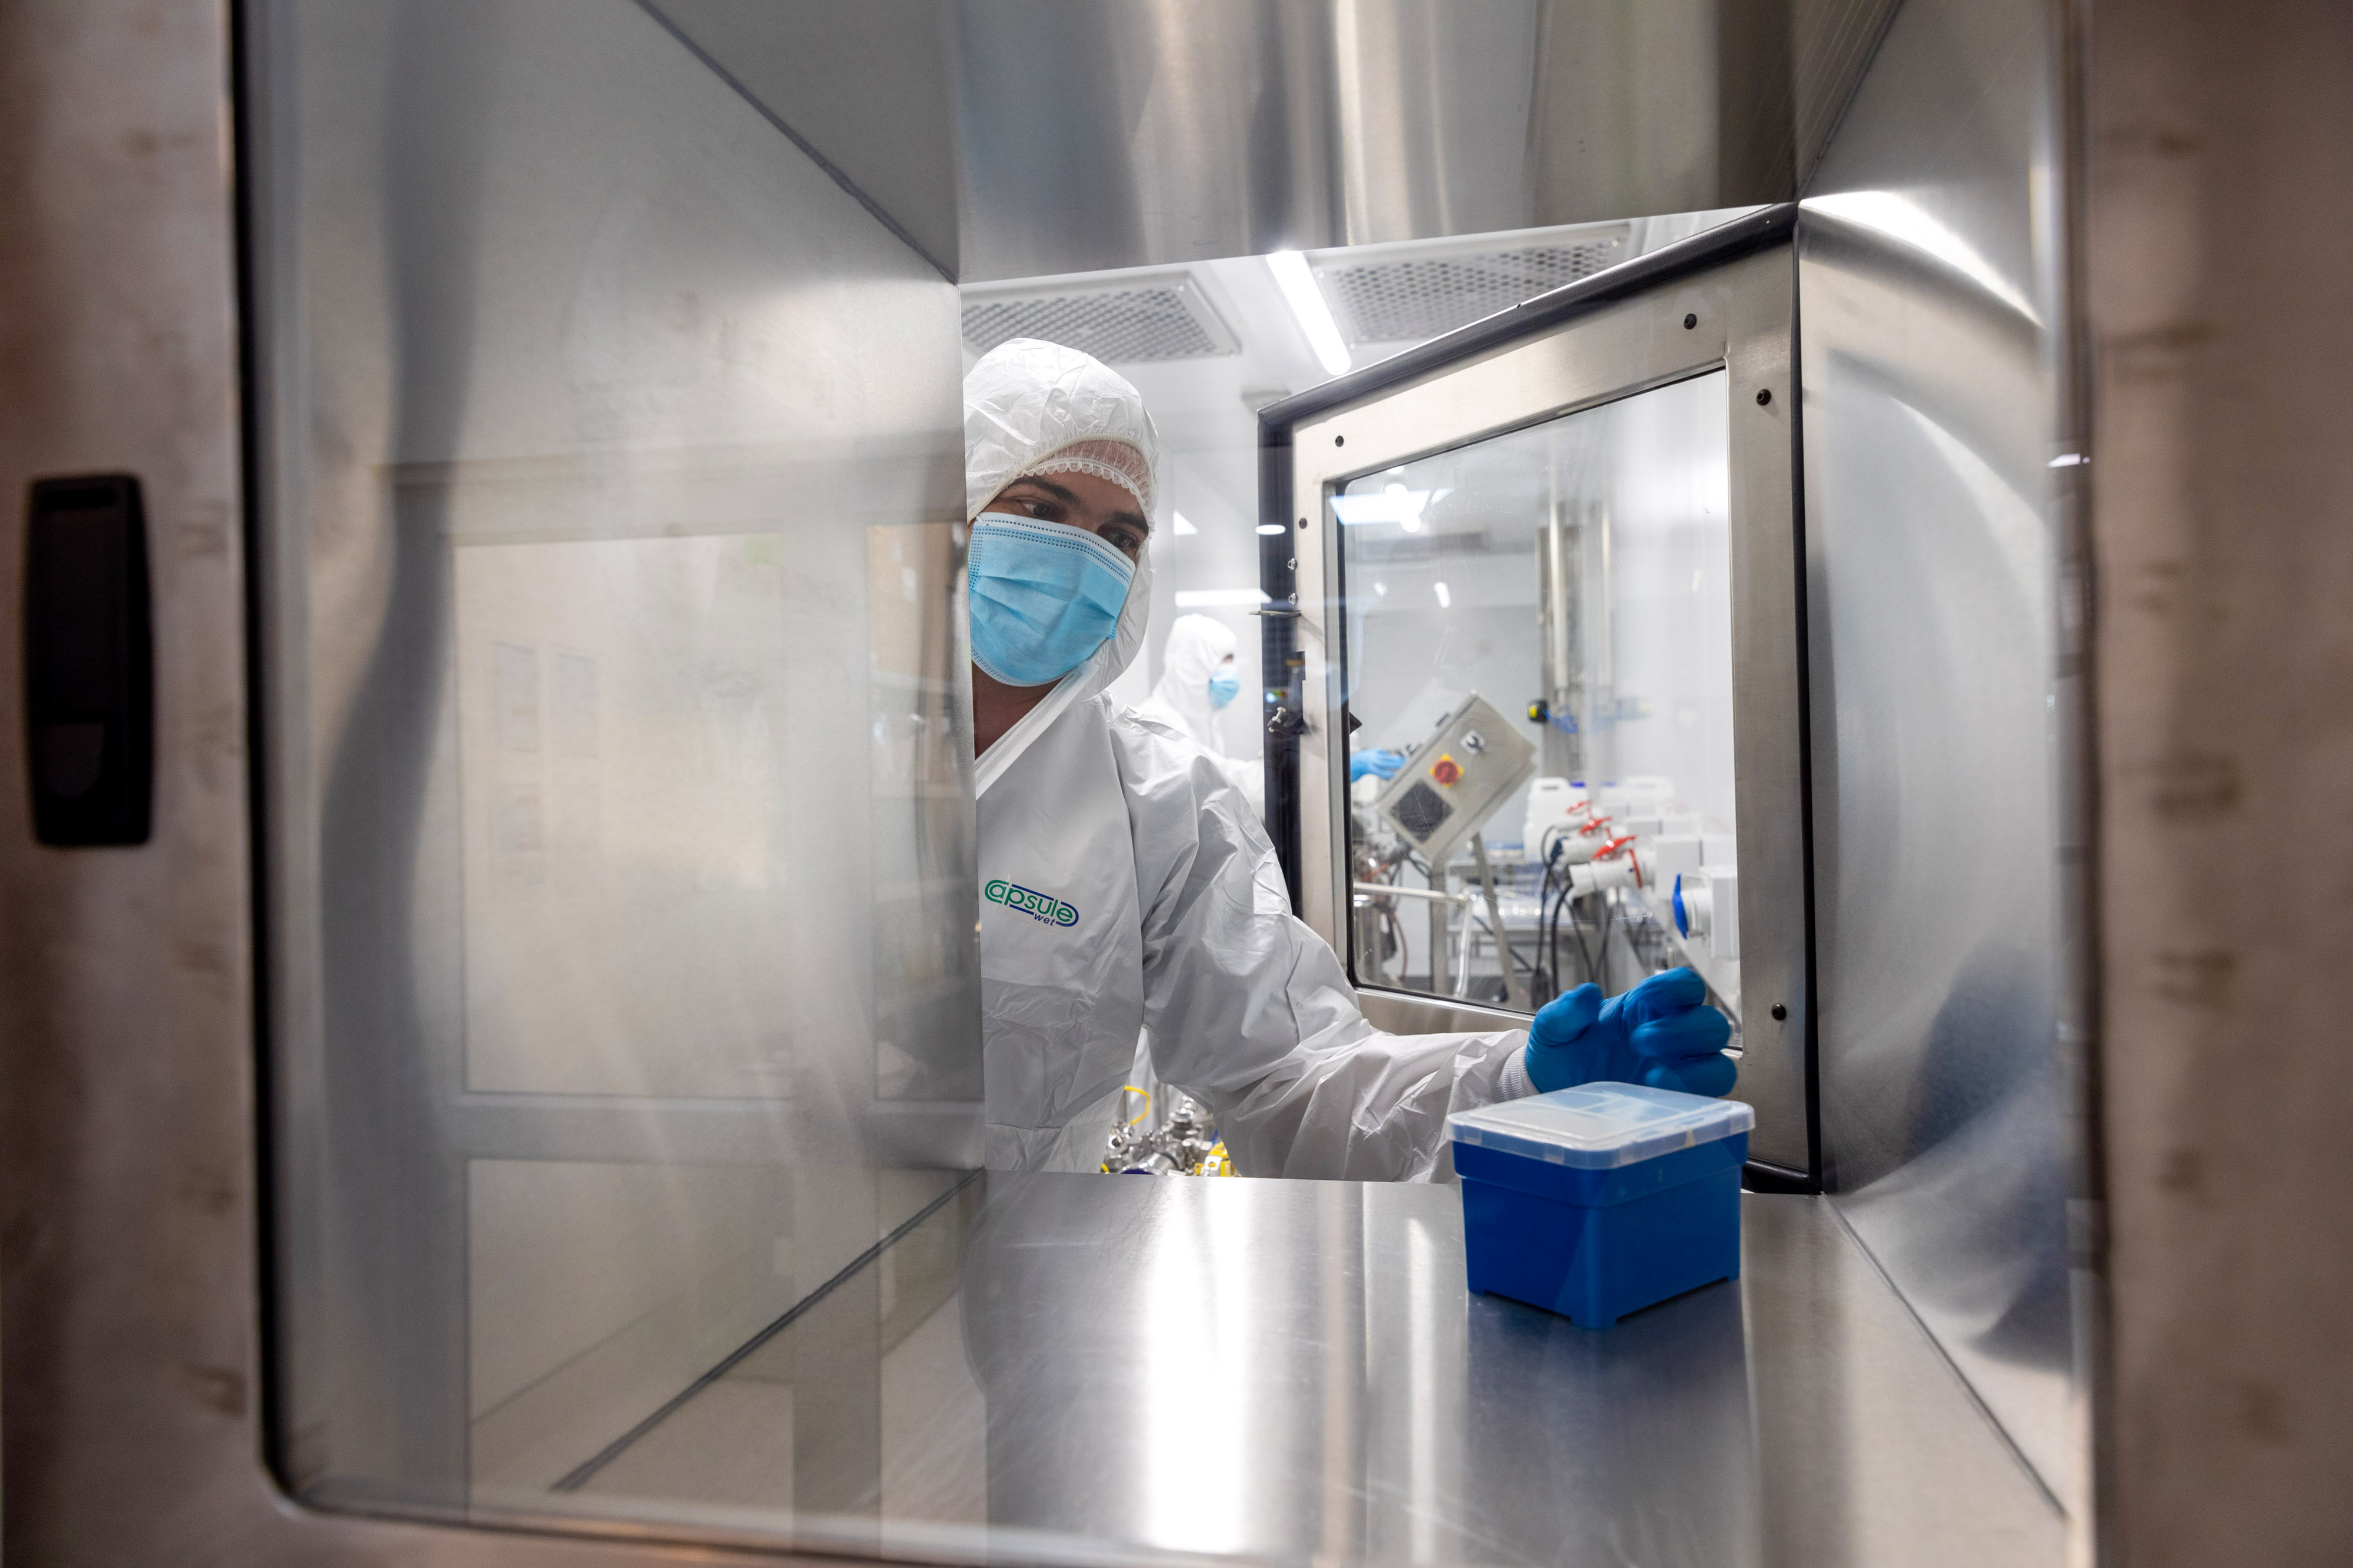 A laboratory at the Afrigen facility, part of the WHO’s mRNA technology transfer hub in Cape Town, on Sept. 12.